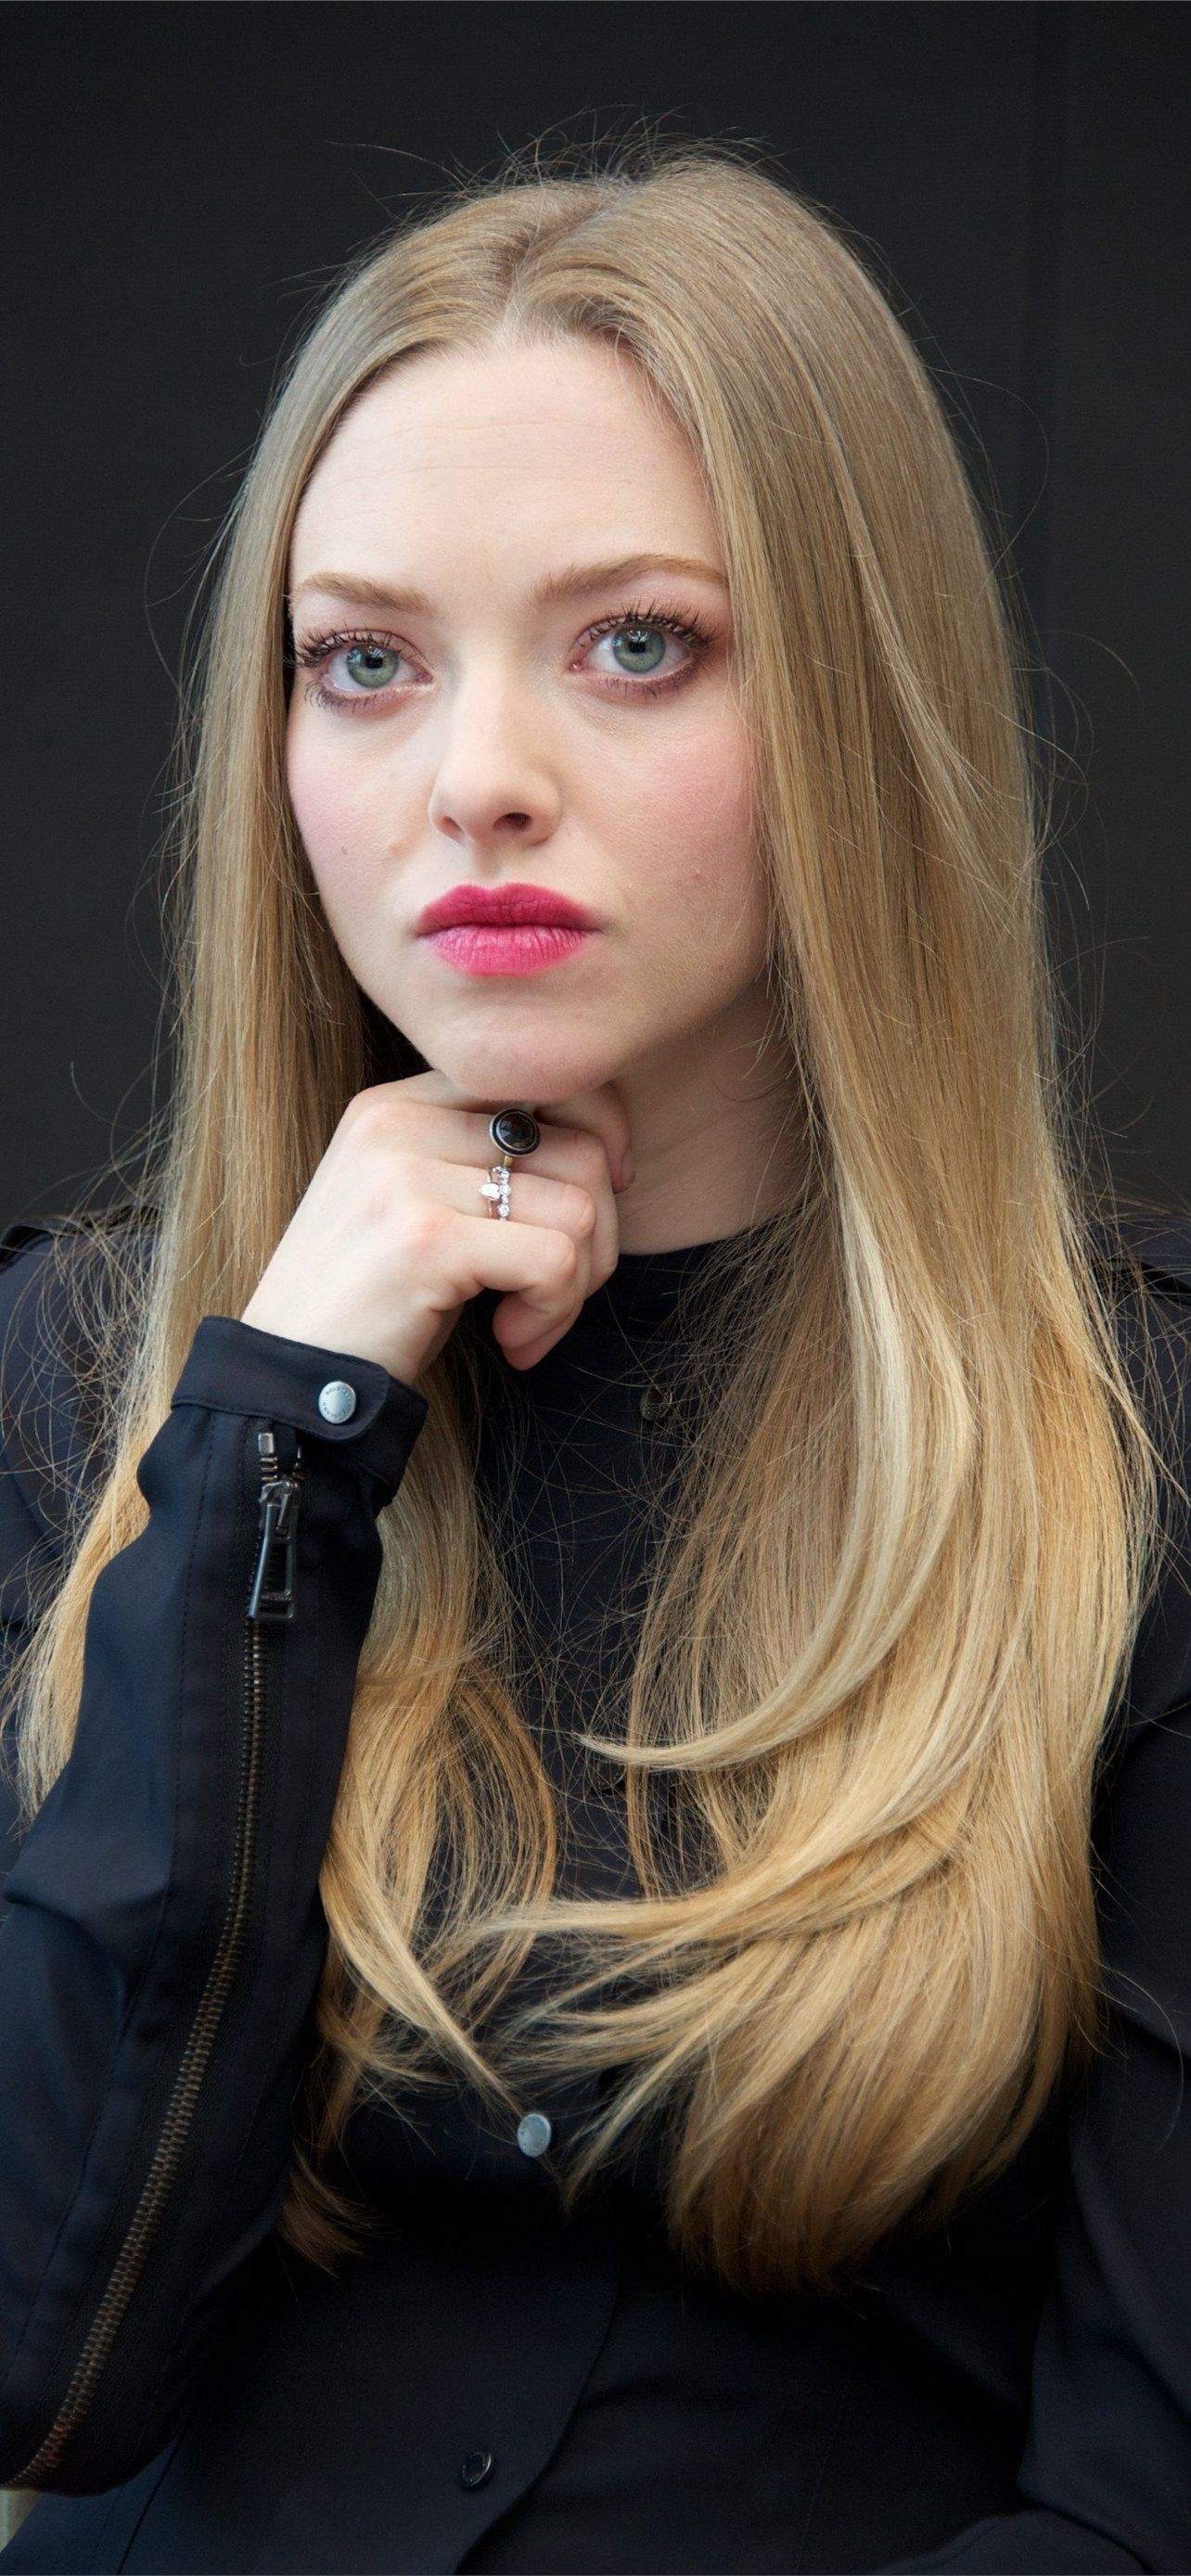 Amanda Seyfried movies, Picture, iPhone wallpapers, Download, 1290x2780 HD Handy